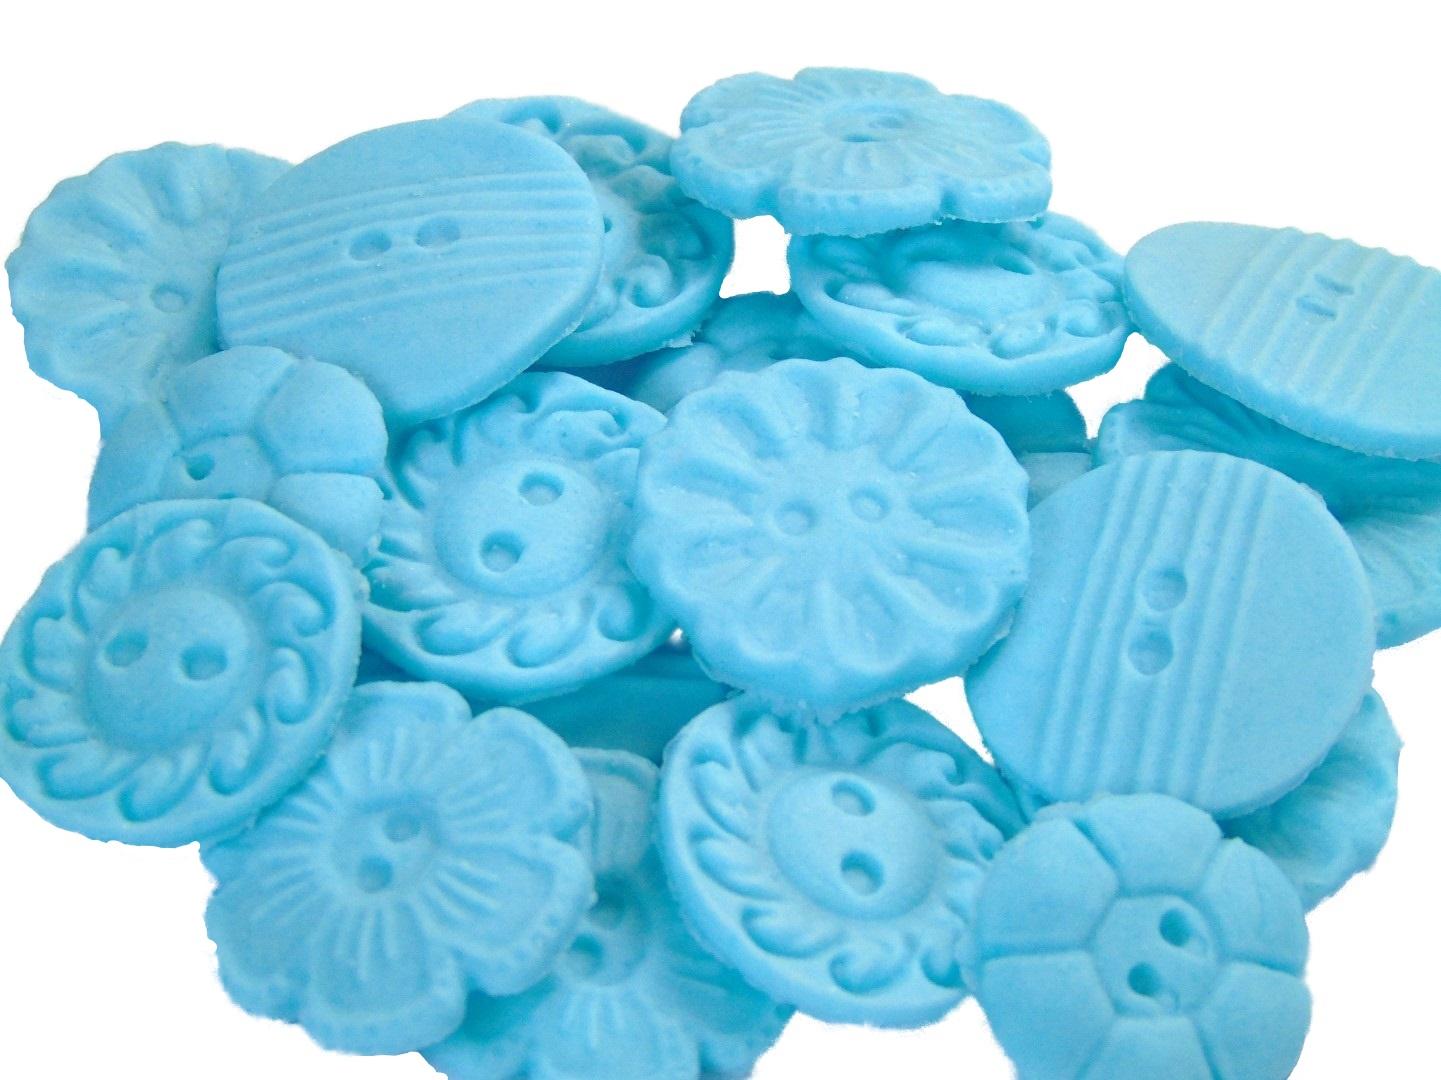 18 Edible Mixed Shaped Blue Coloured Buttons Vegan Cupcake Toppers